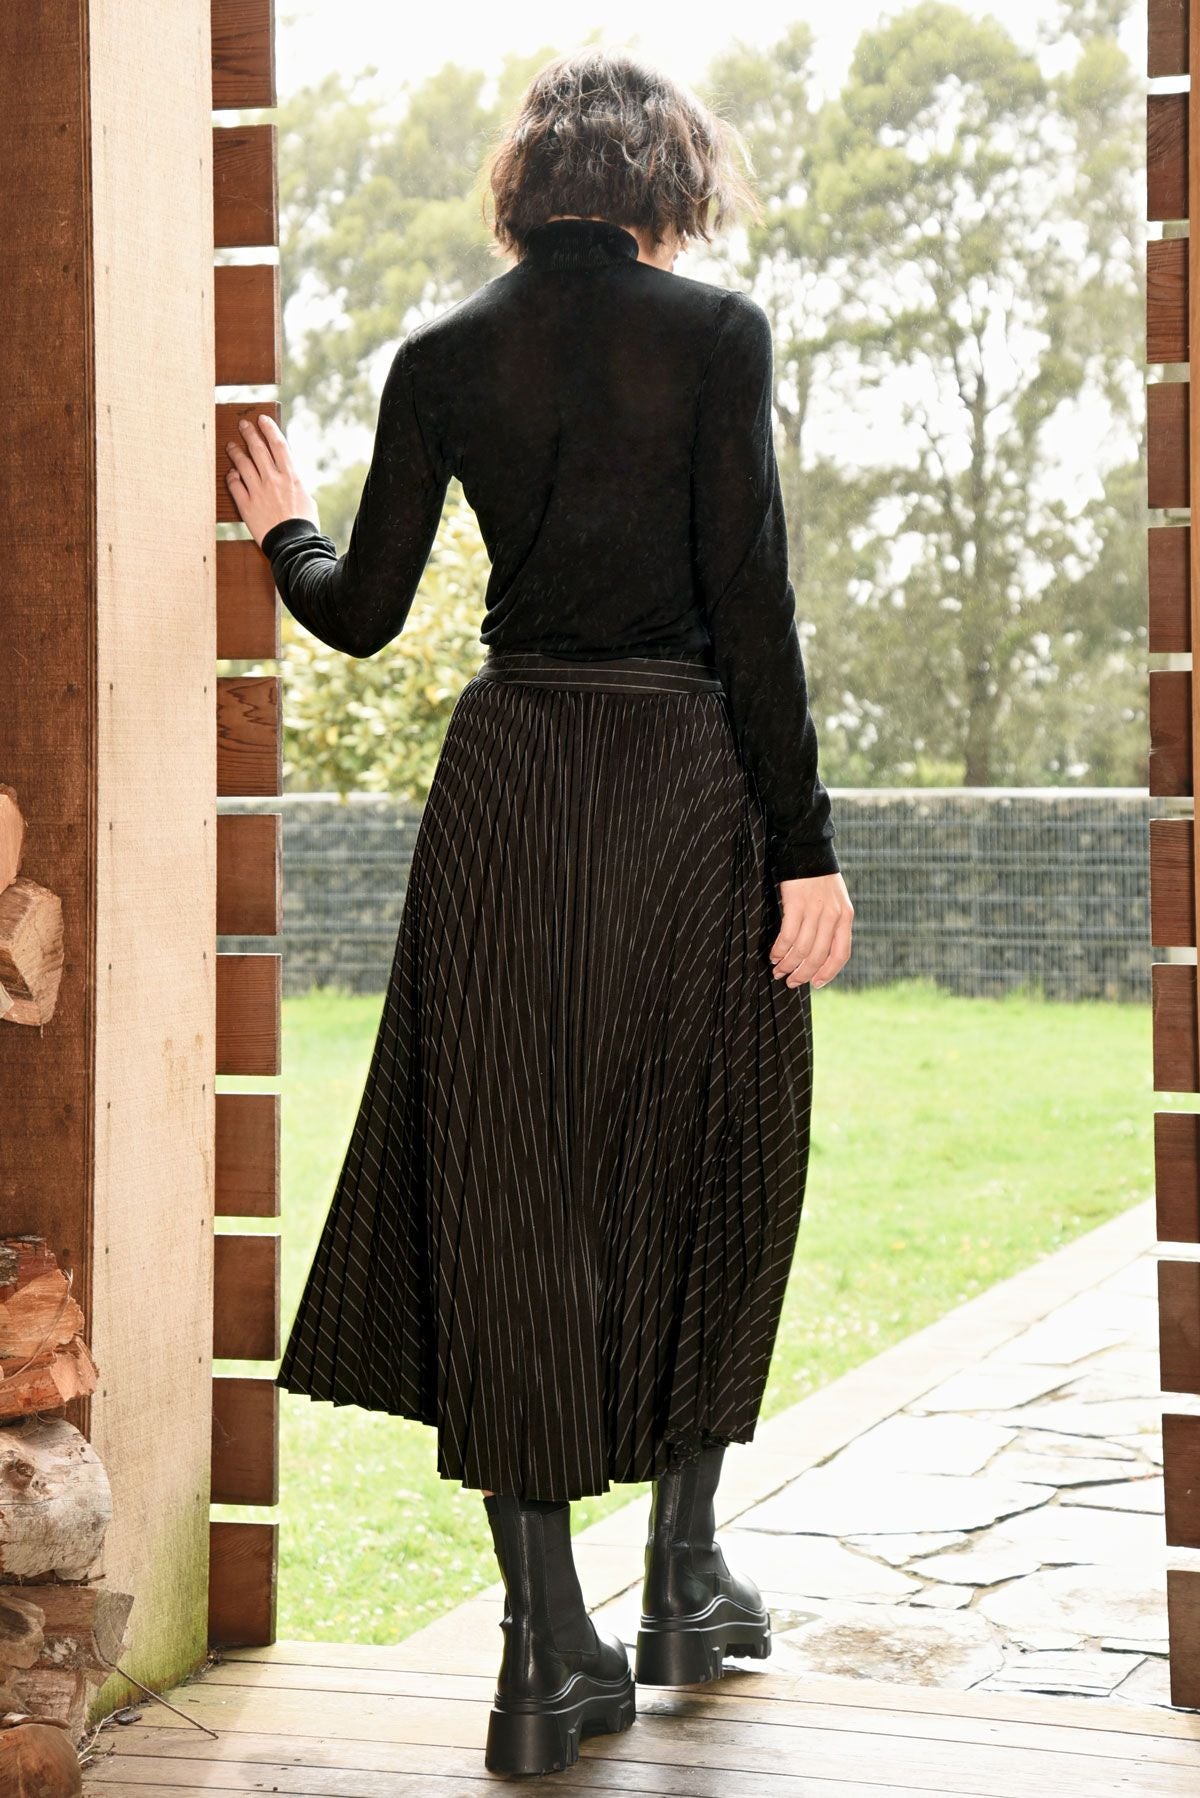 COOPER TAKE A PLEAT SKIRT - BLACK PINSTRIPE - THE VOGUE STORE